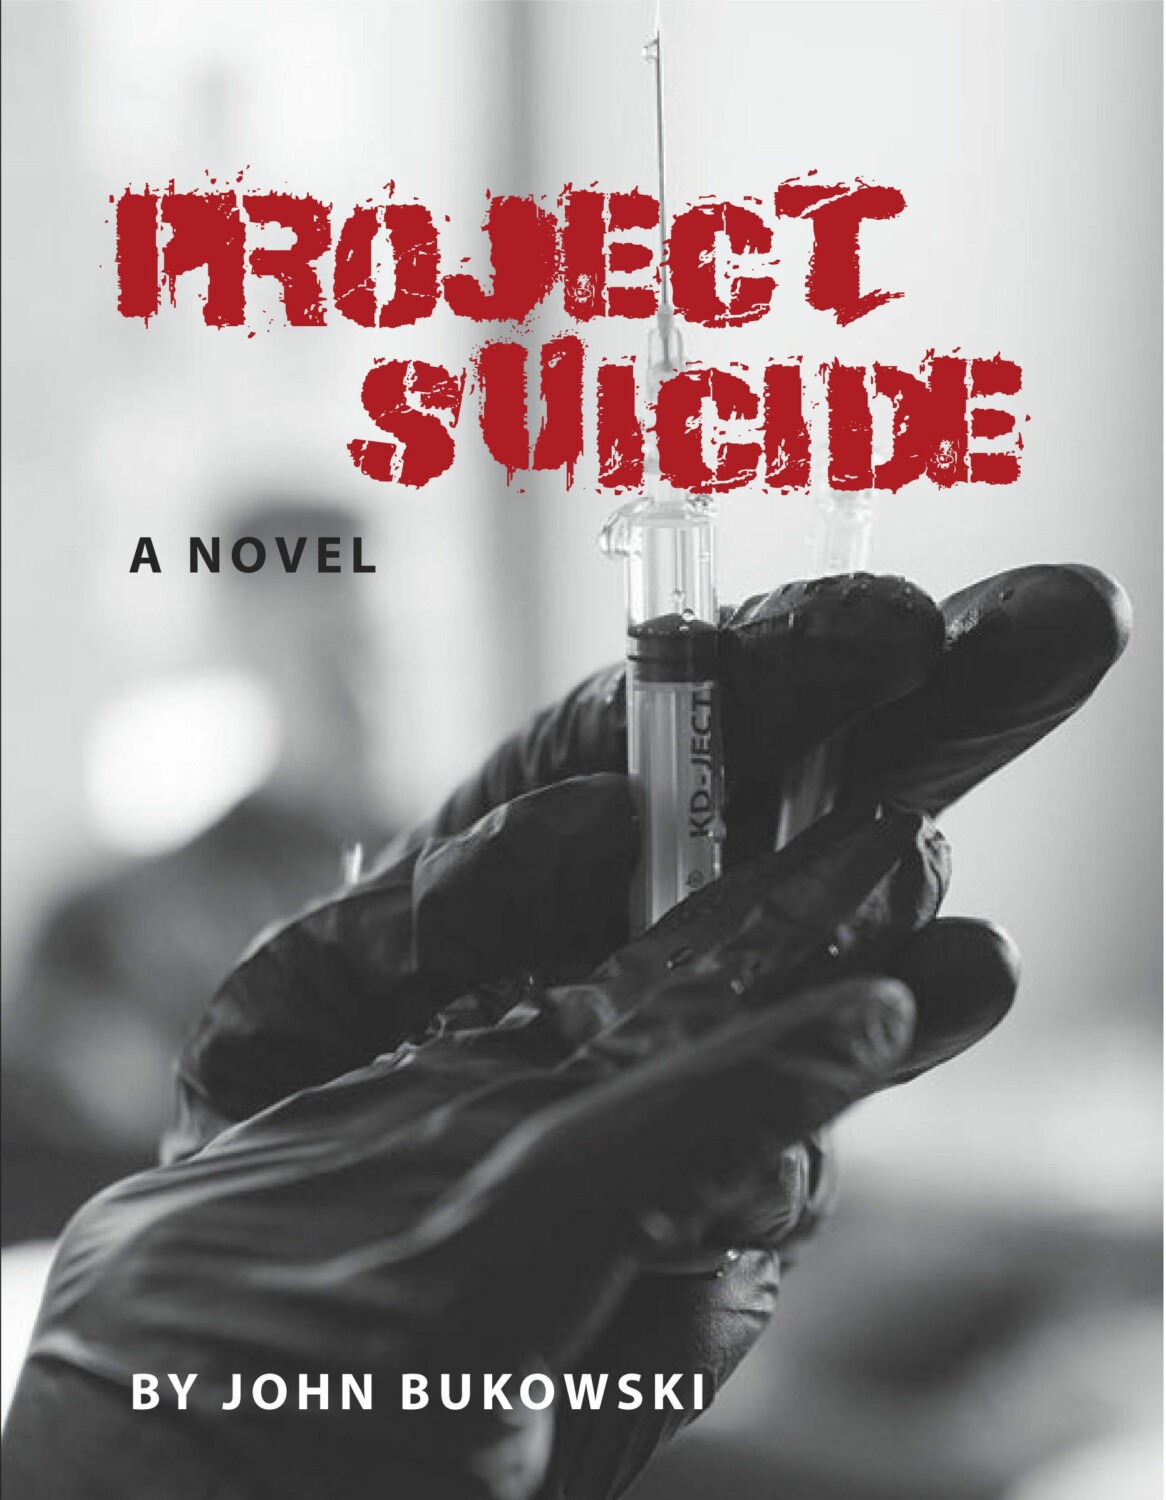 Project Suicide Novel now available at www.projectsuicidenovel.com